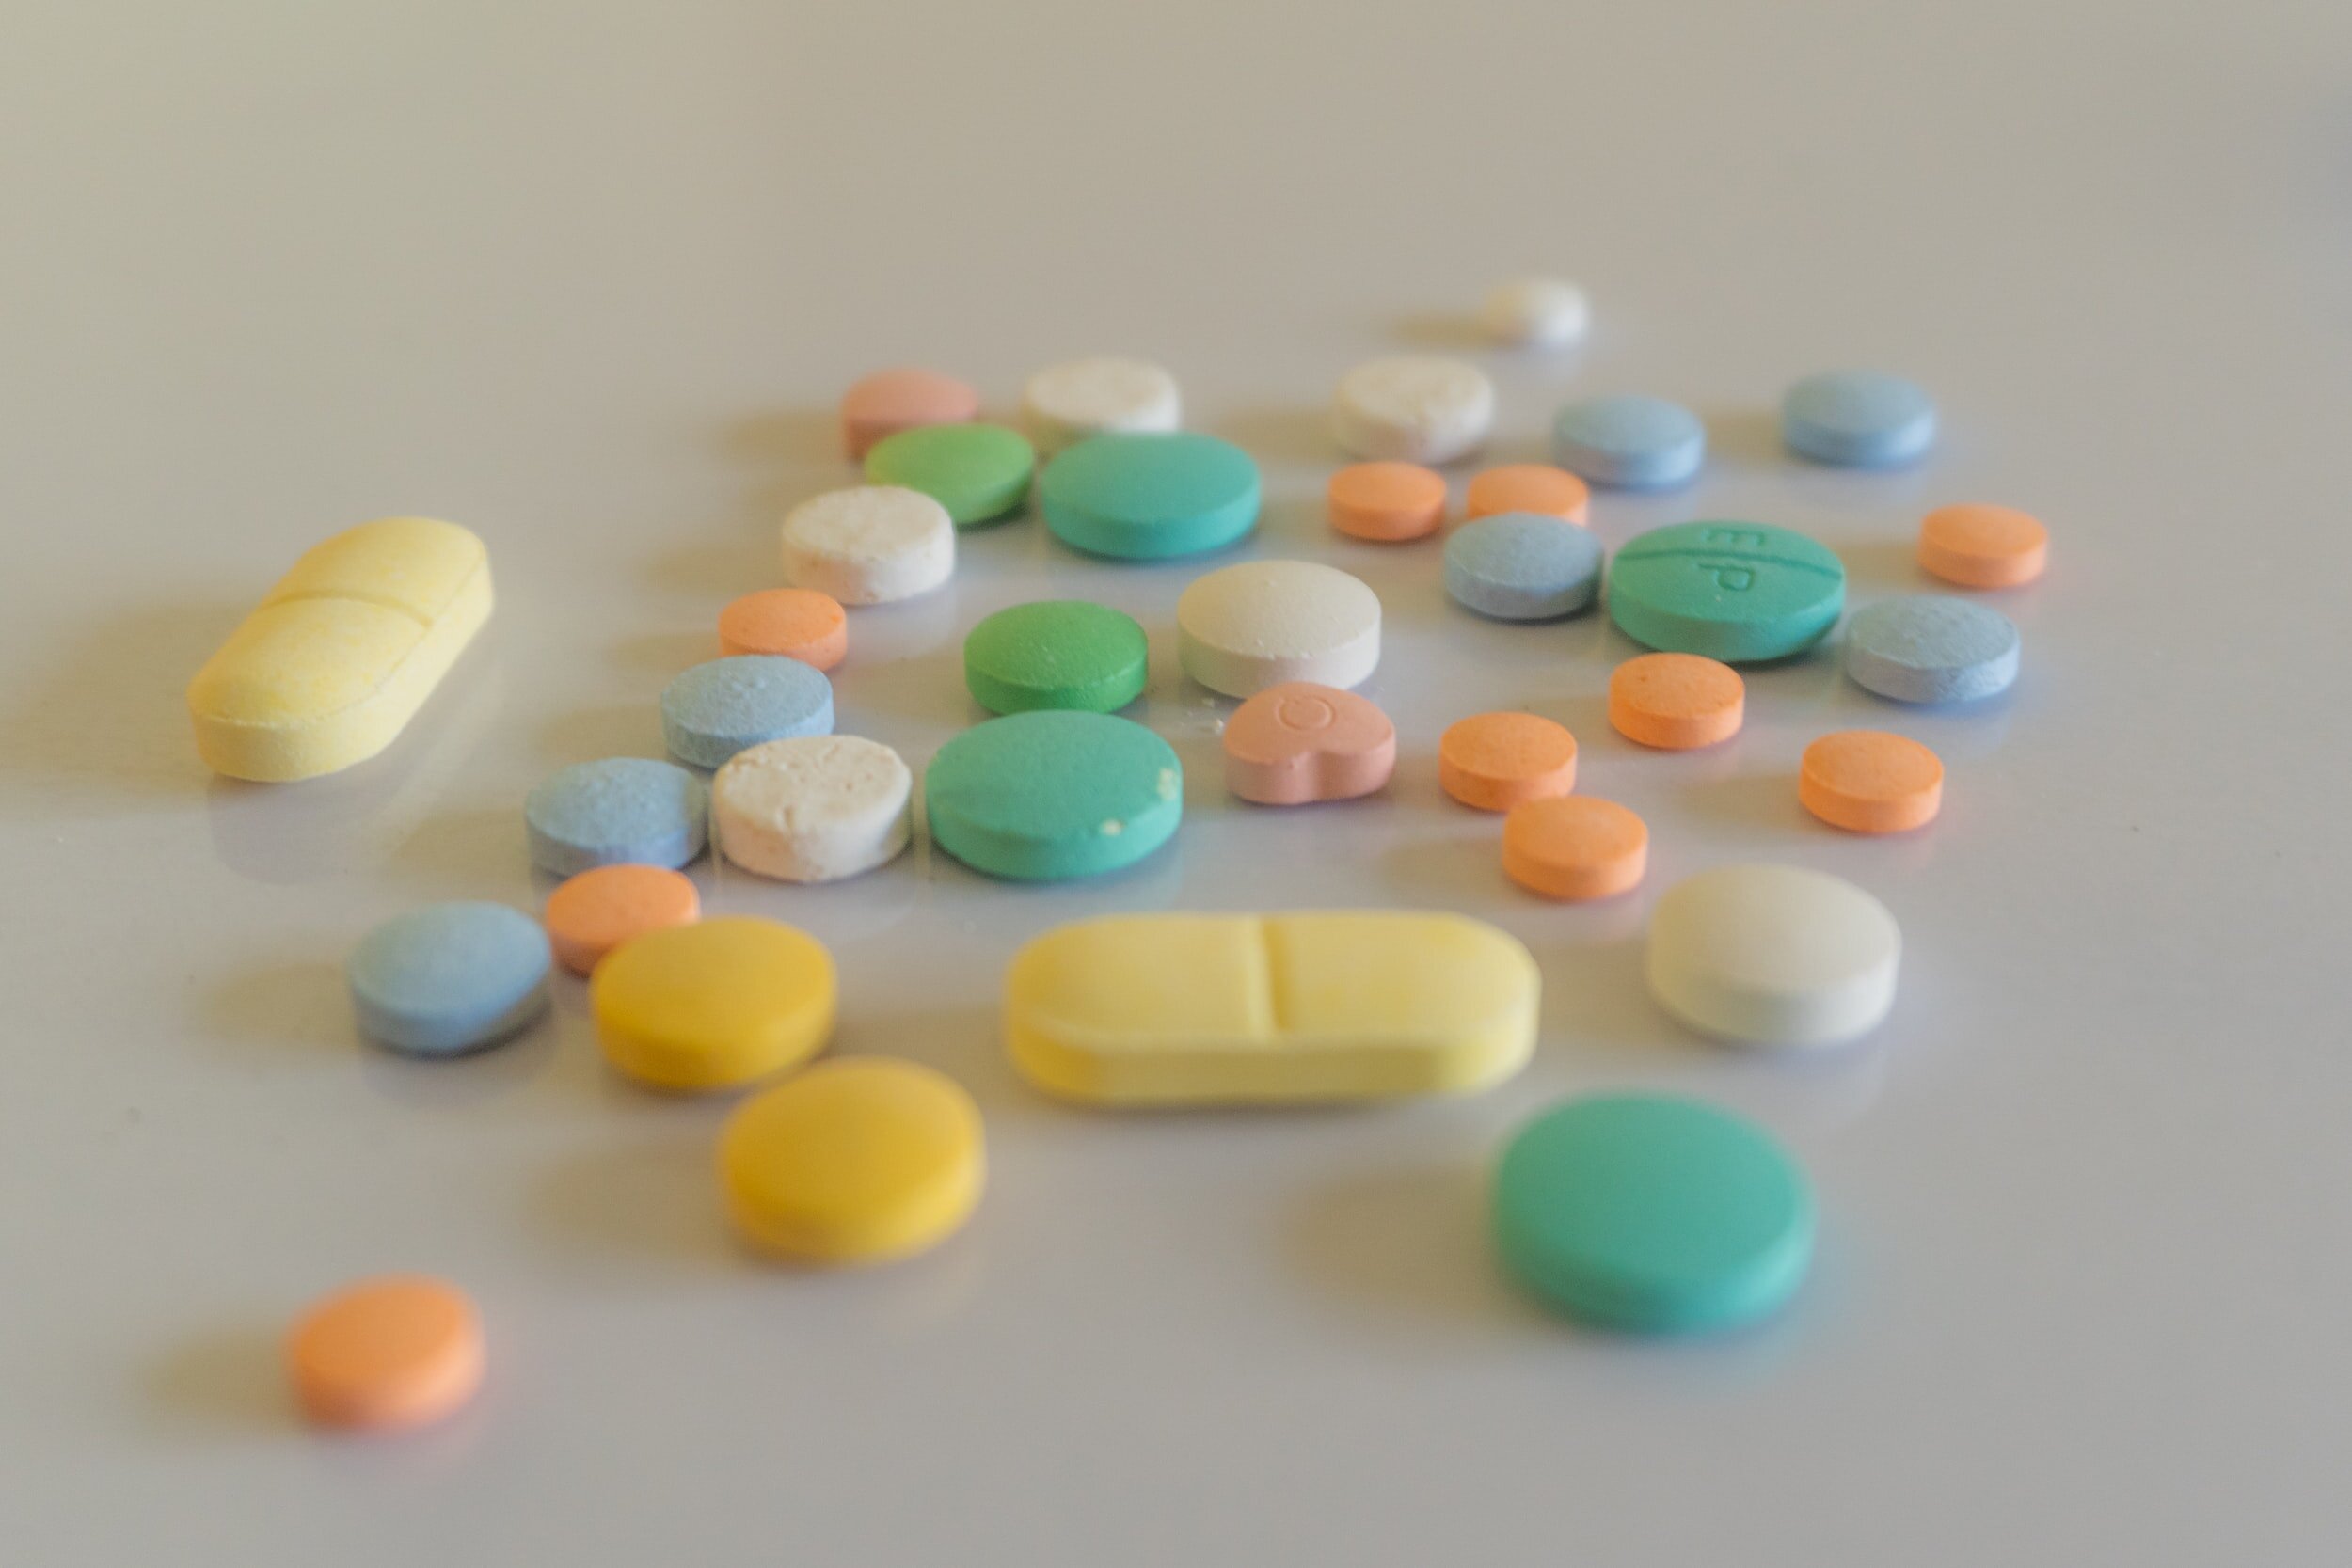 Photo by Prasesh on UnsplashAn assortment of pills ranging in shape and color sit on top of a white counter.